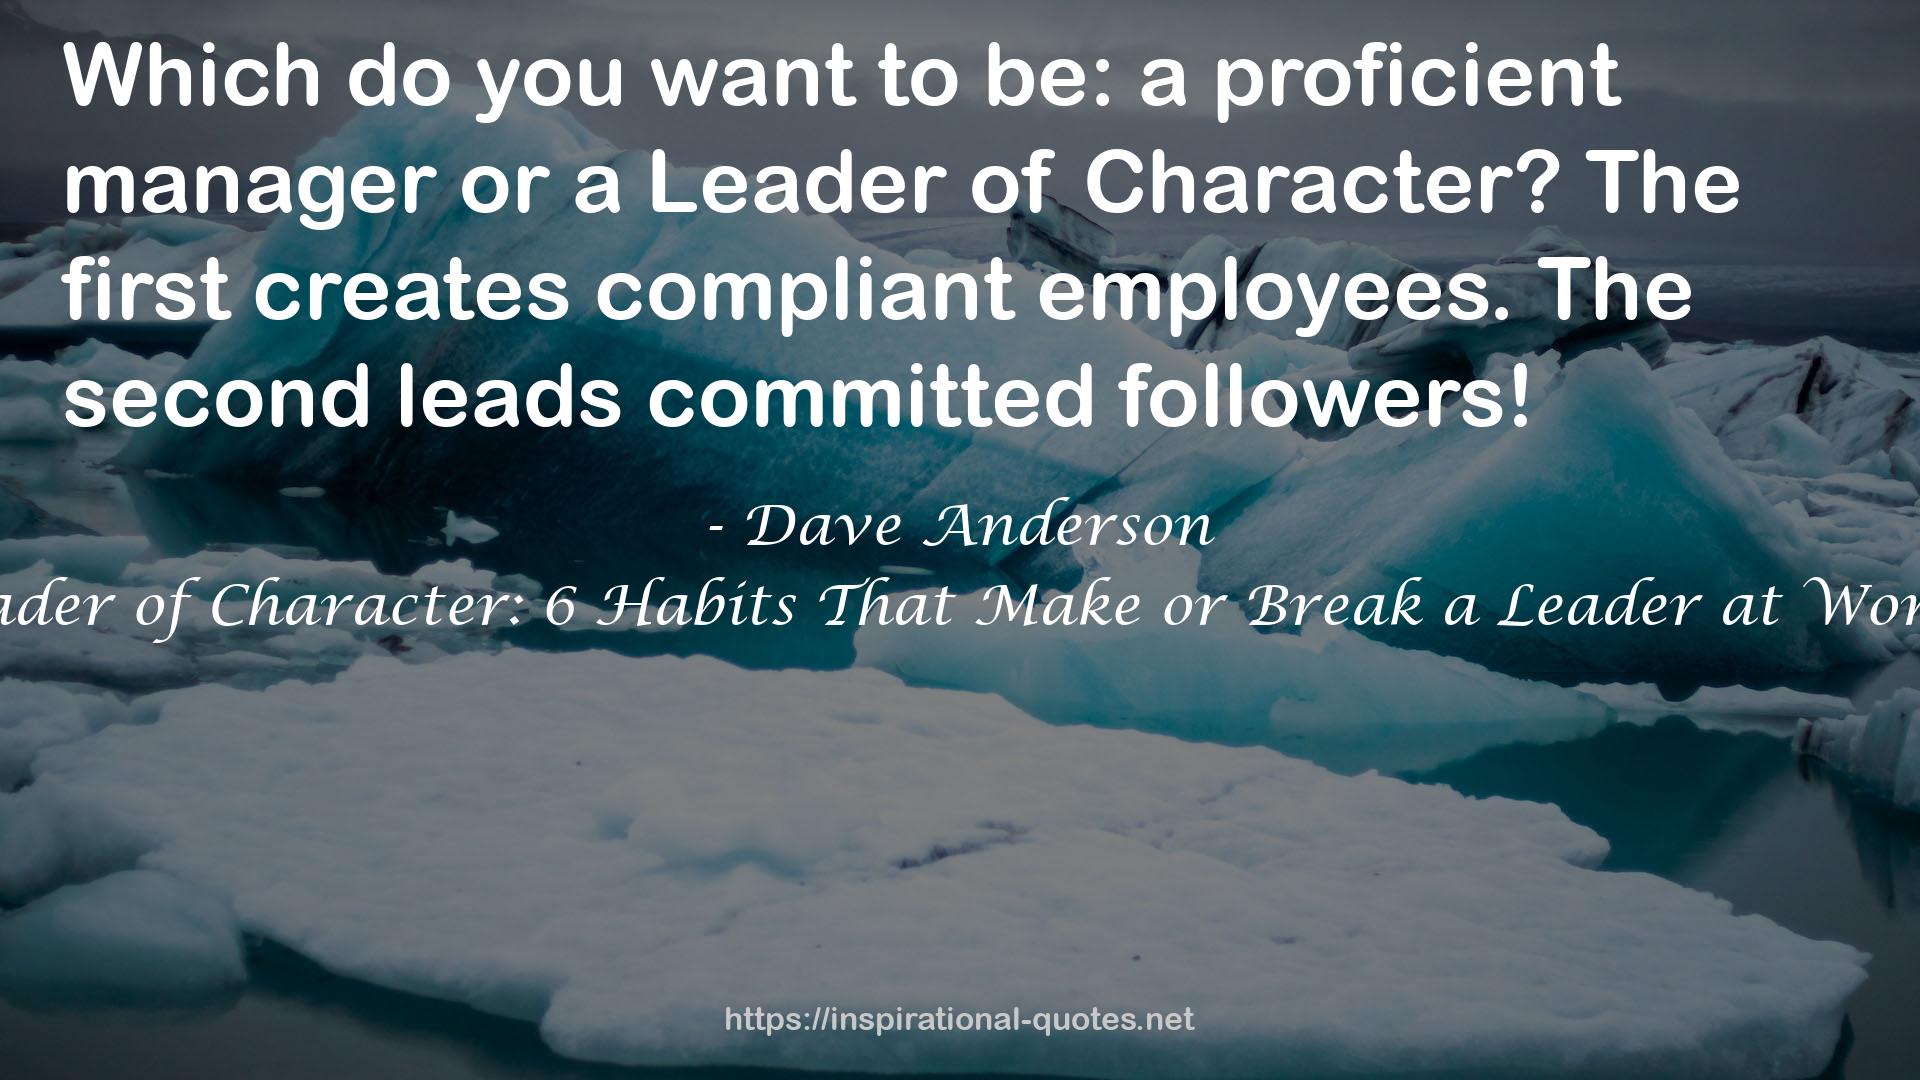 Dave Anderson QUOTES